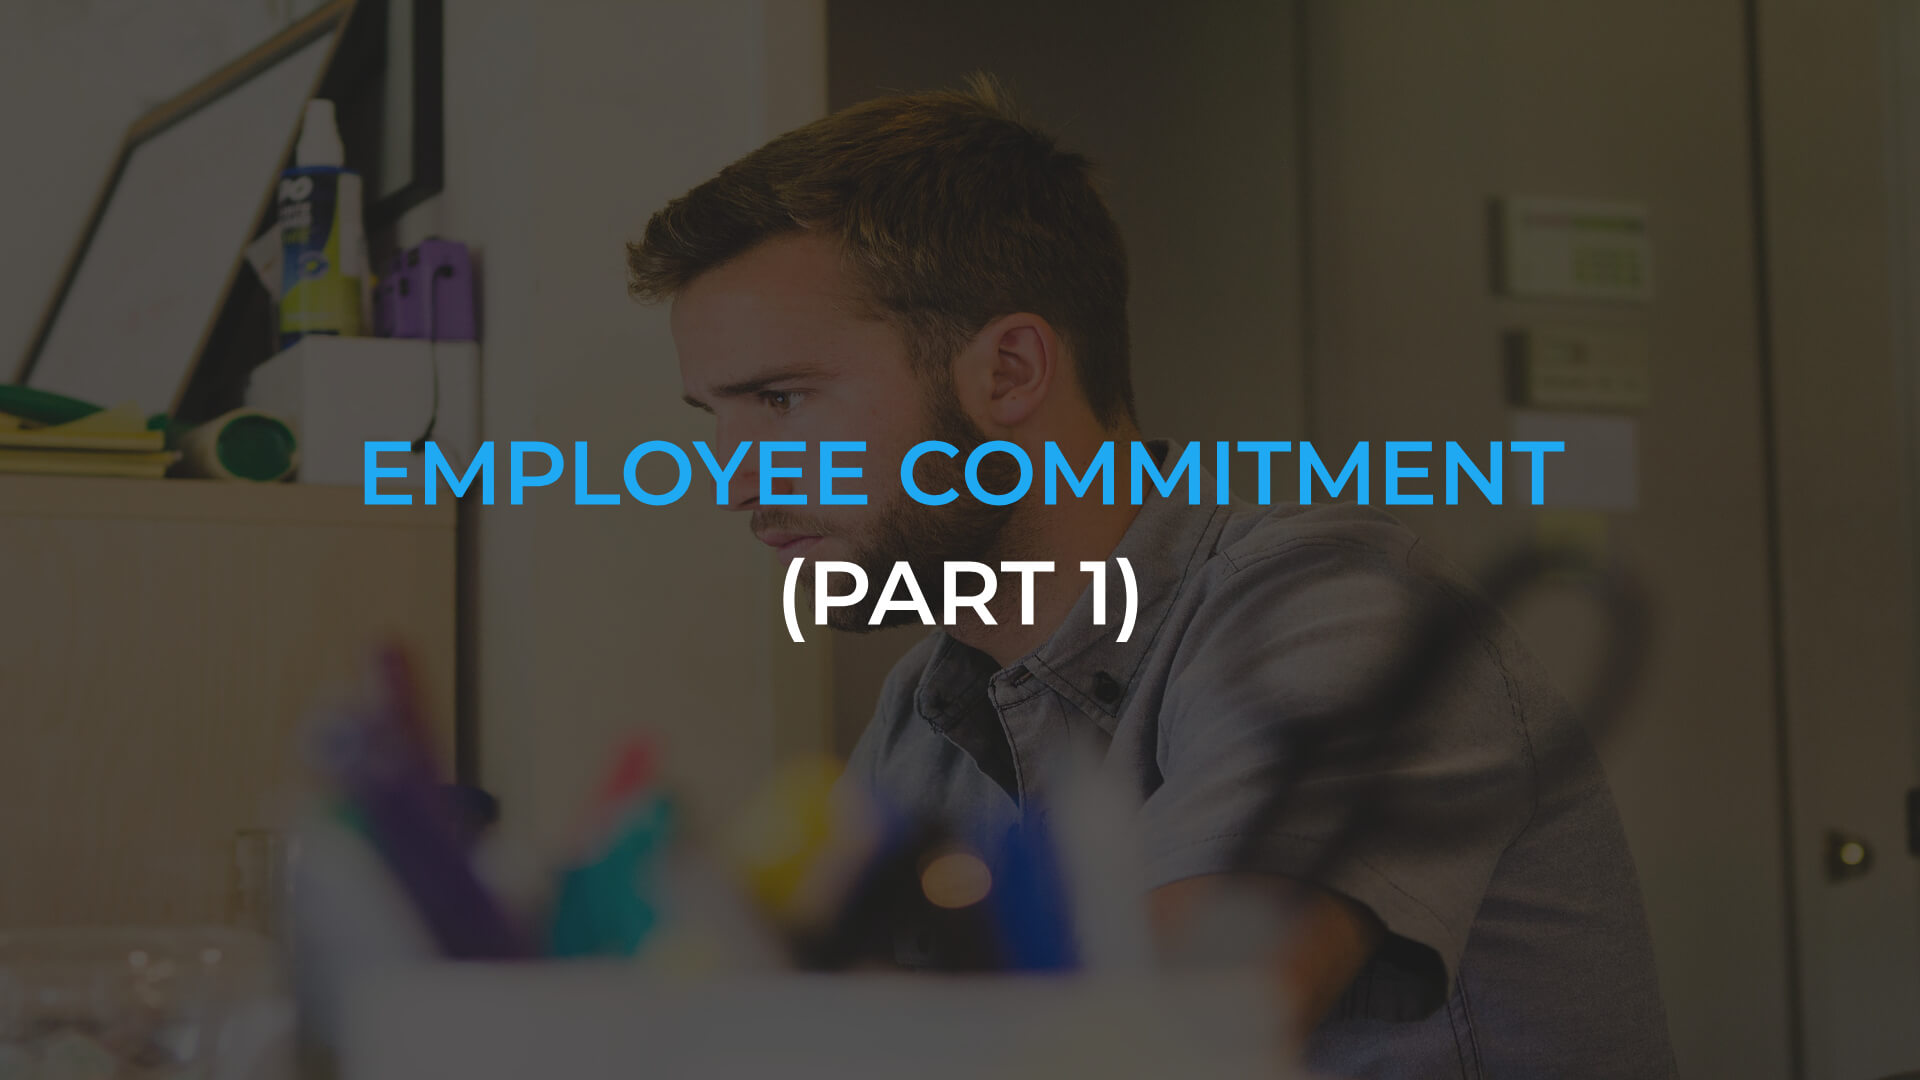 How to increase employee commitment using digital signage? (Part 1)